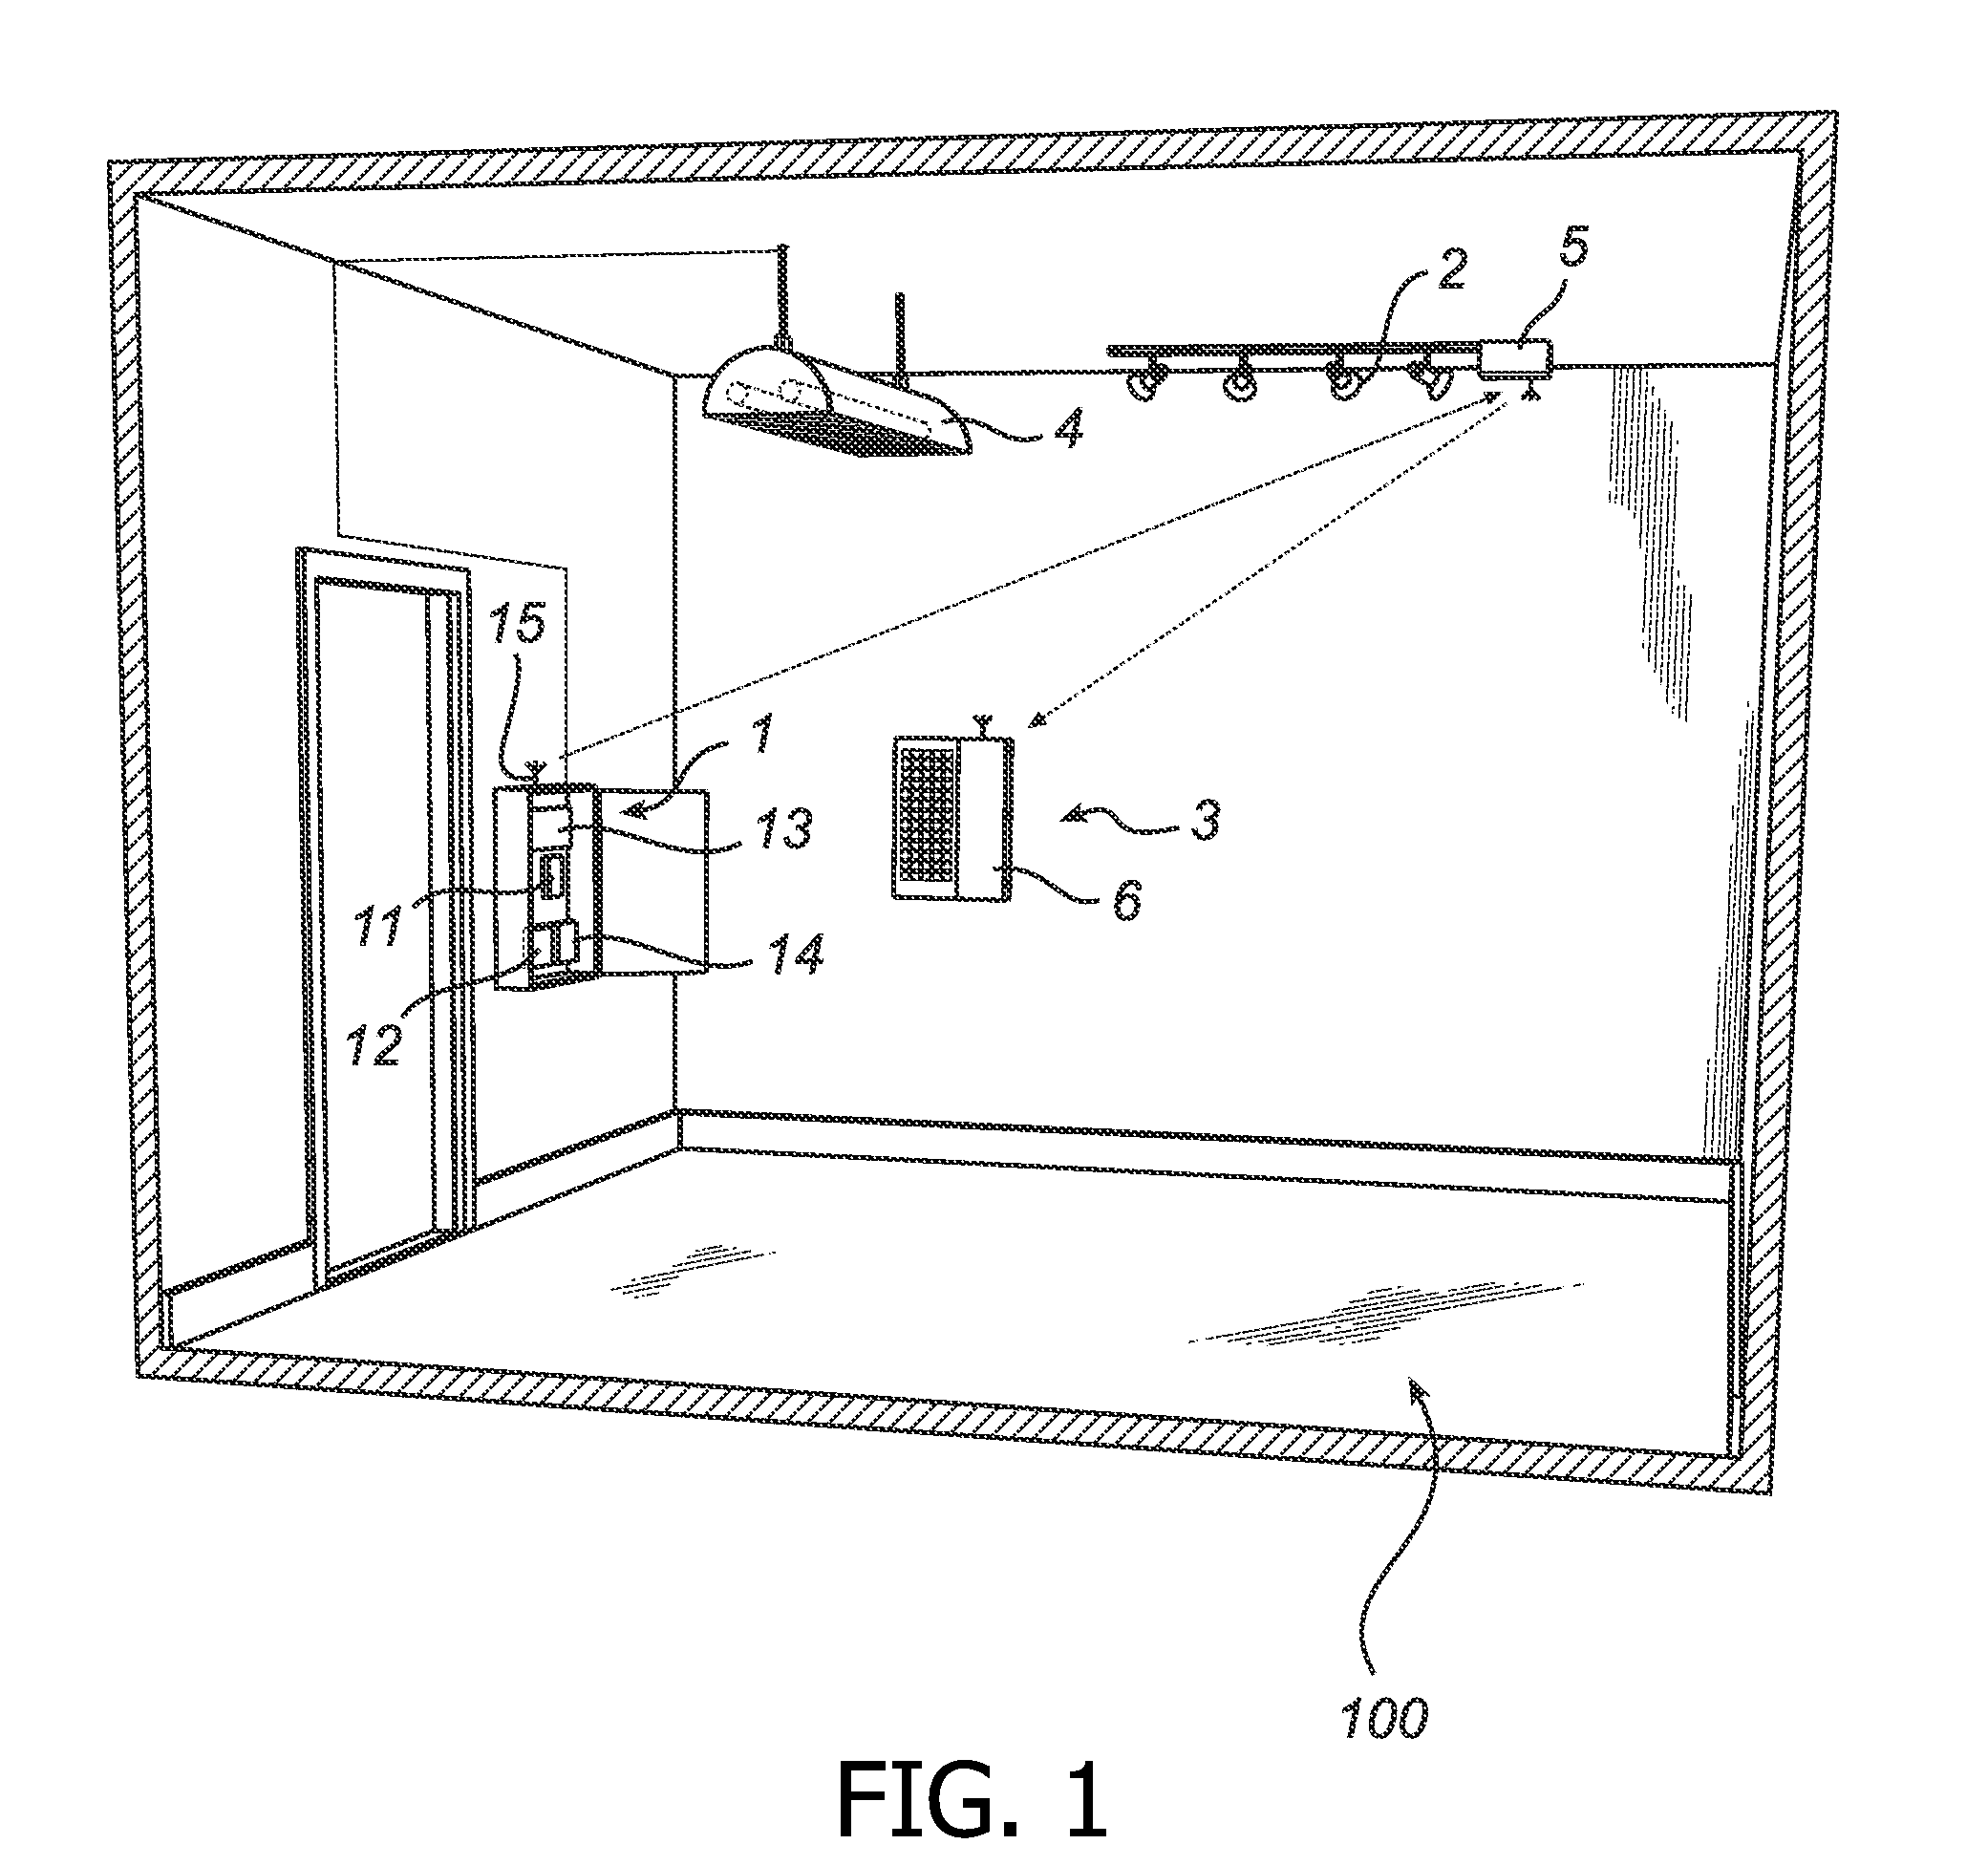 Method of controlling a lighting system